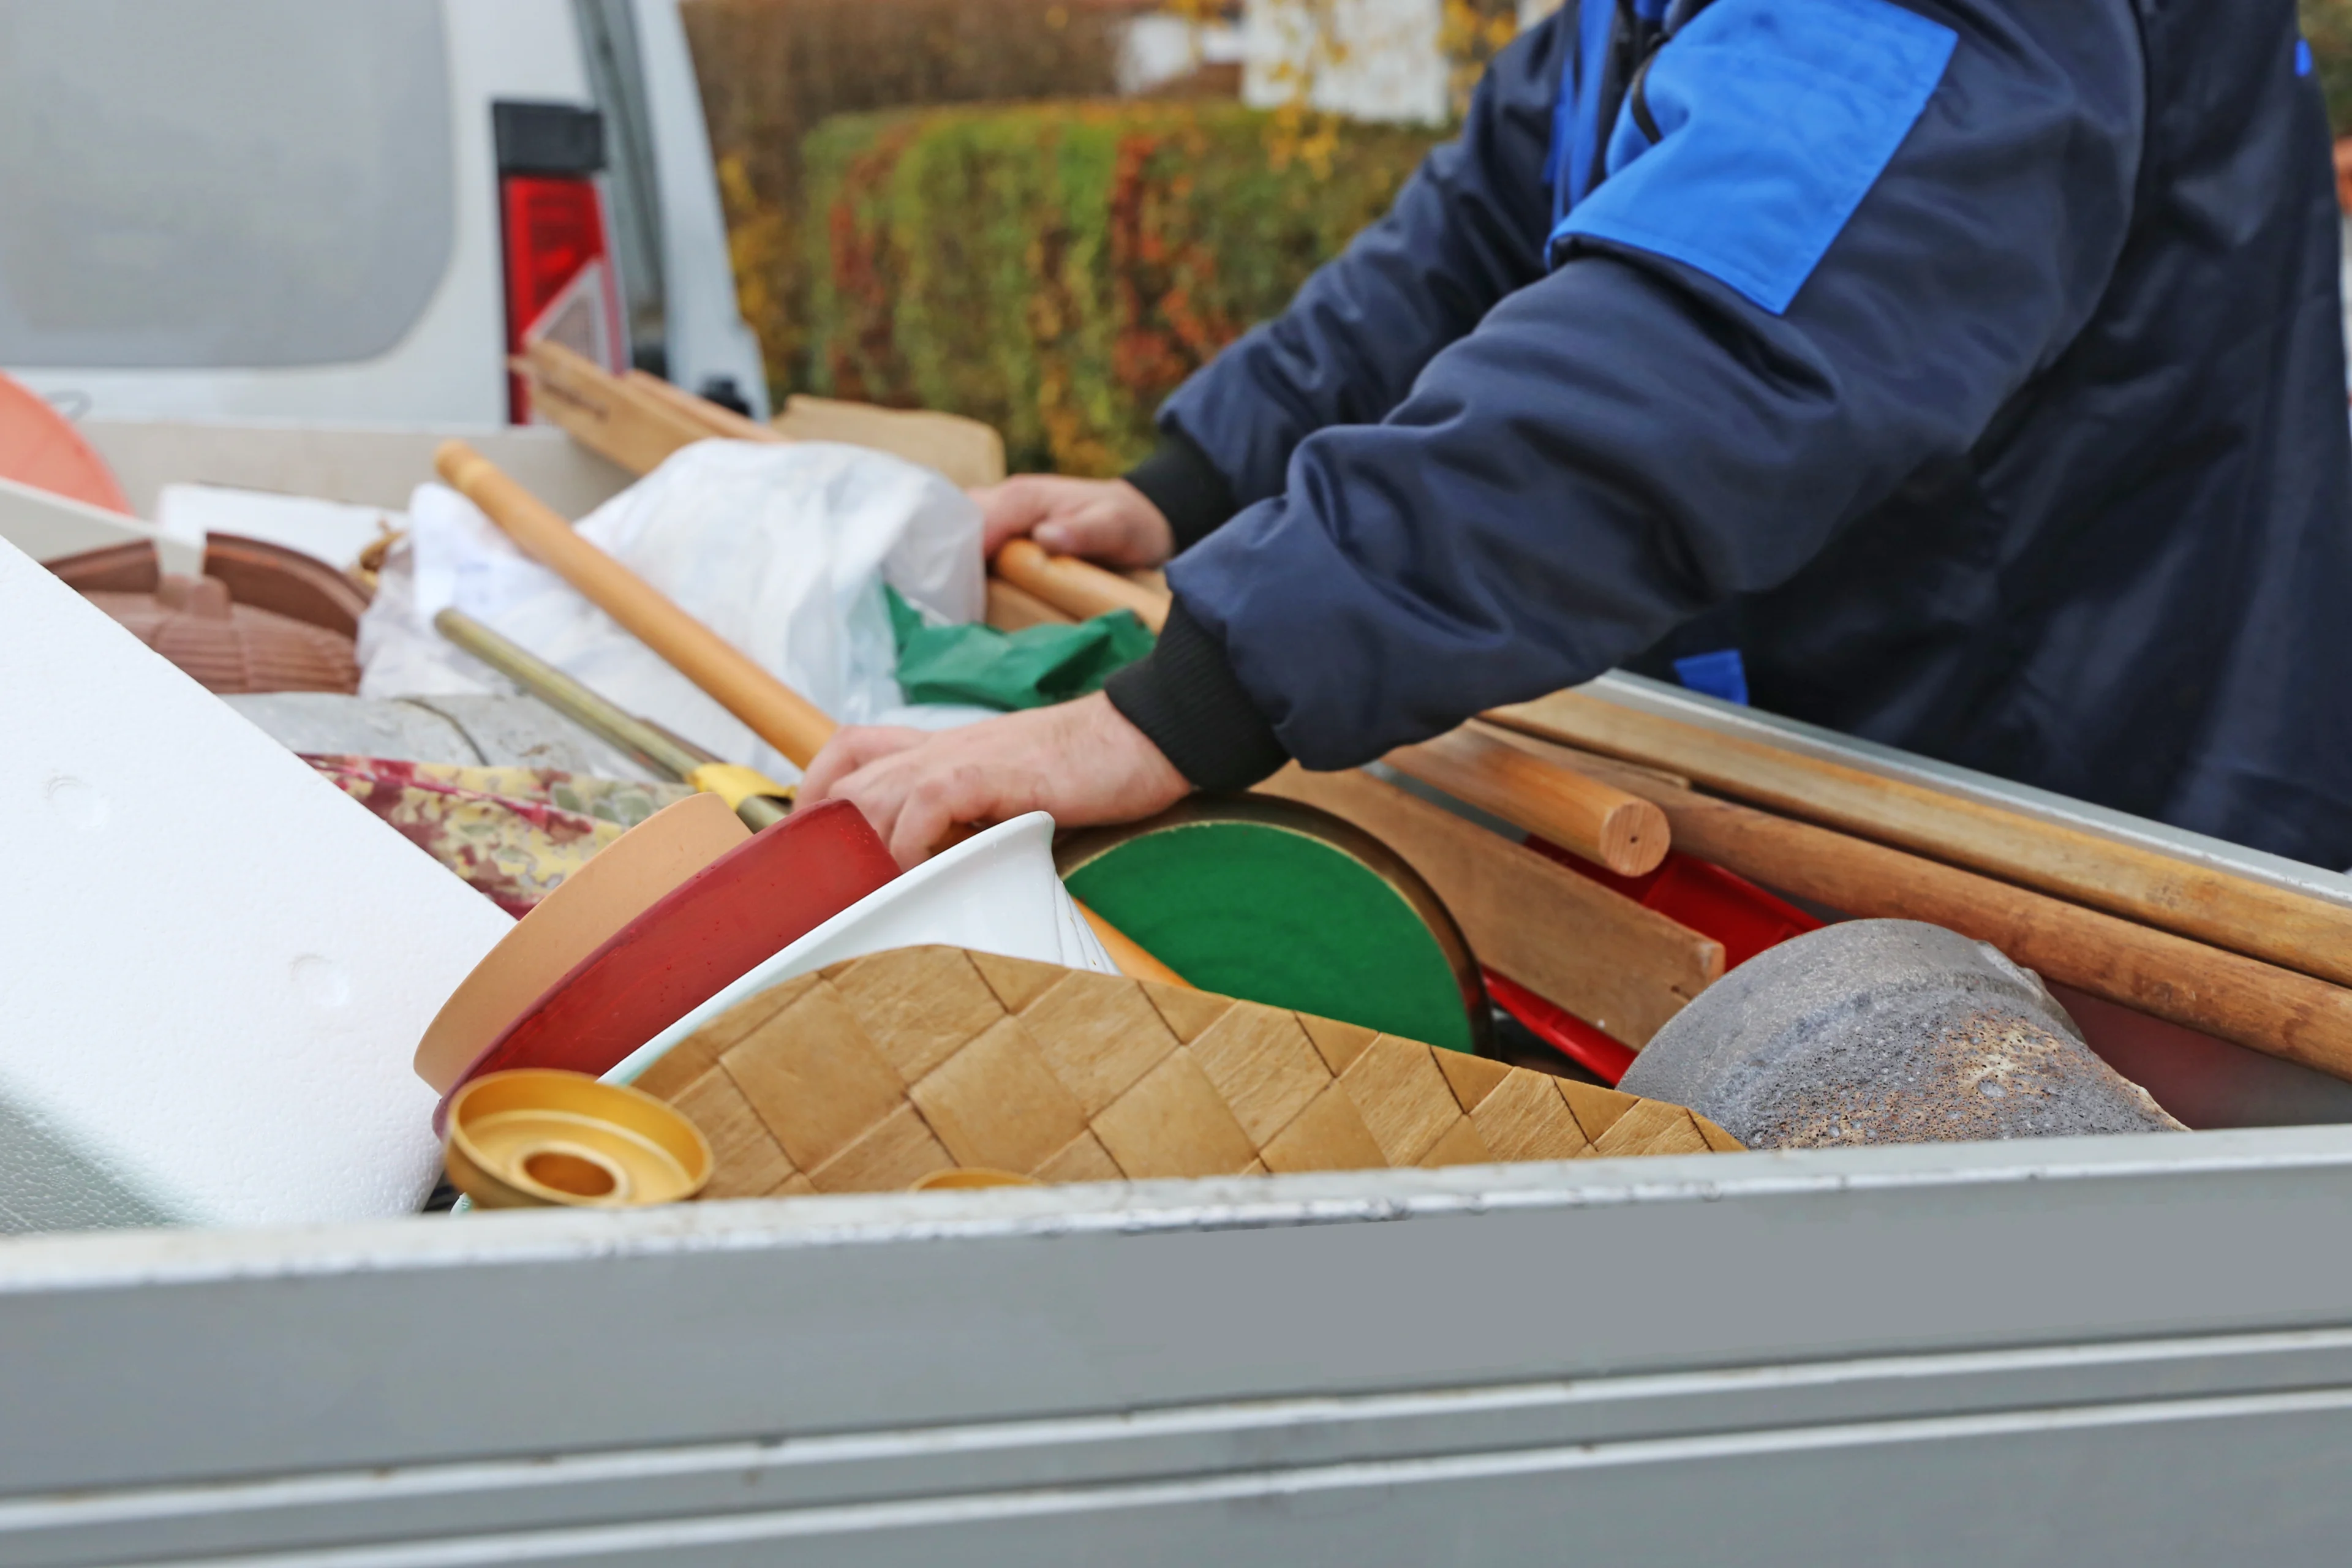 a person loading junk items into the back of a truck to haul away.